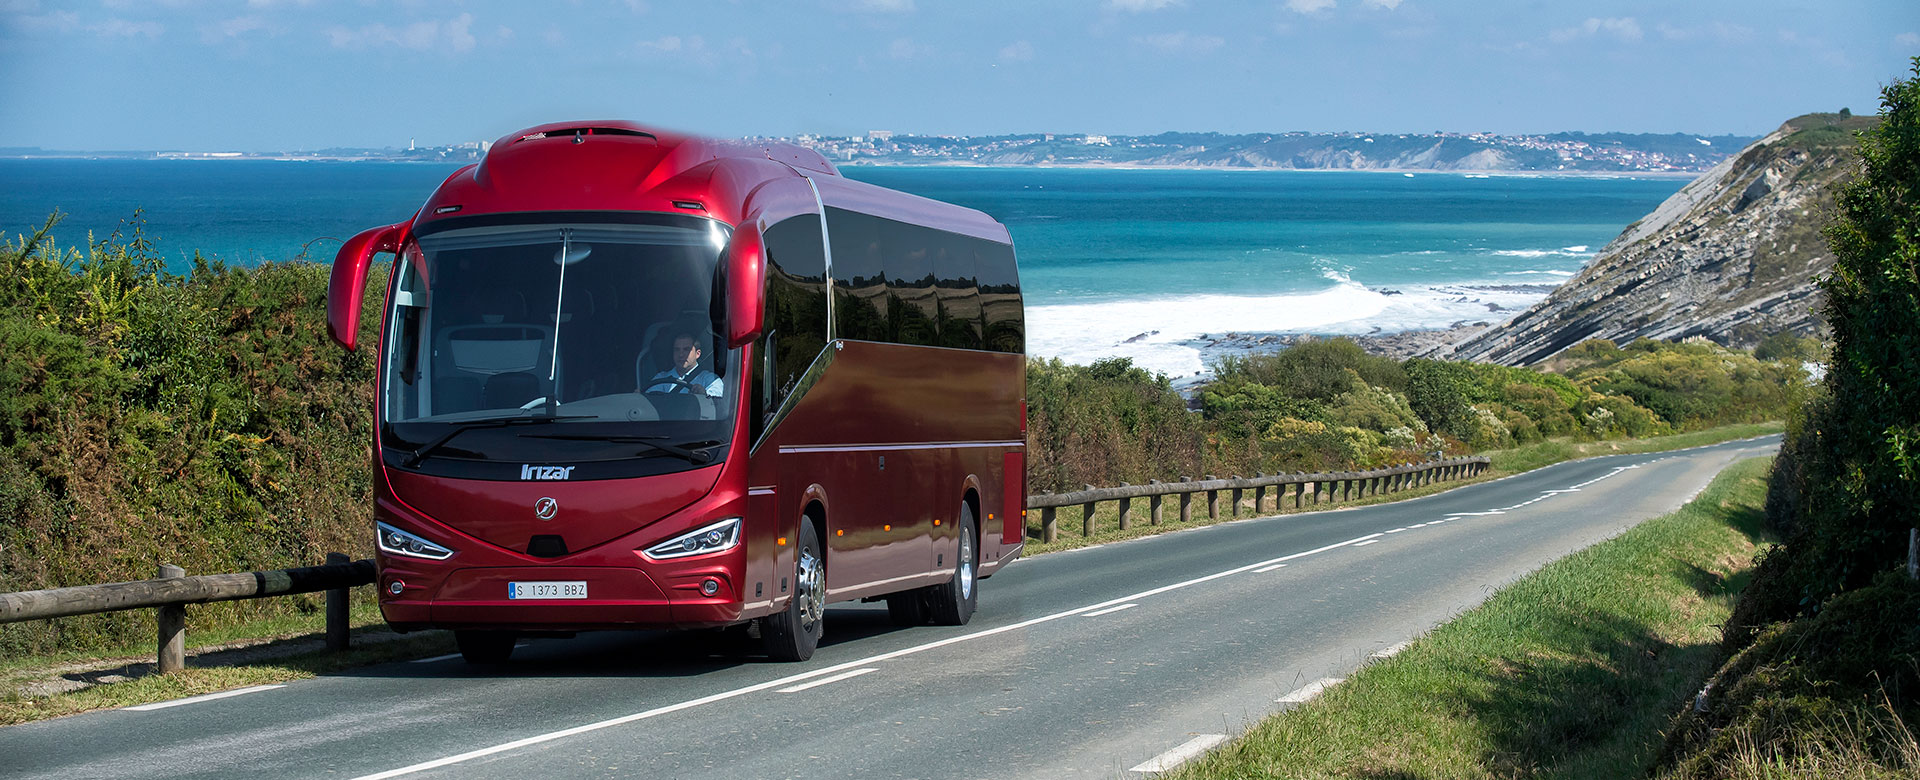 Tourism - coaches equipped with all the best comforts